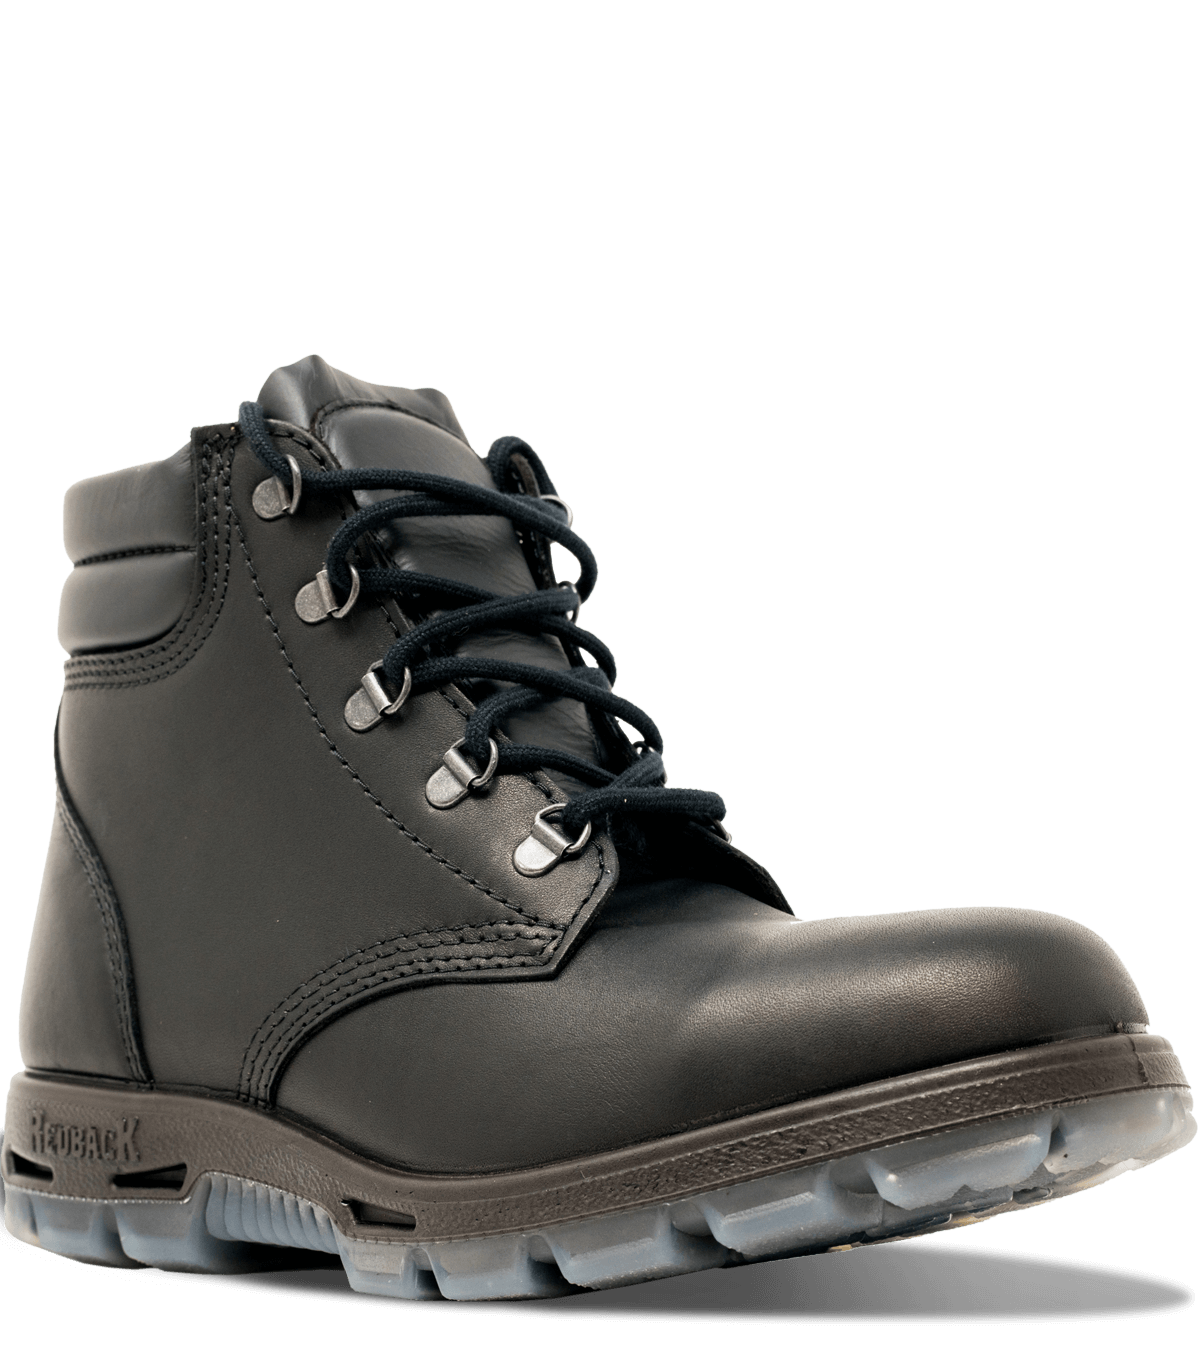 redback womens boots